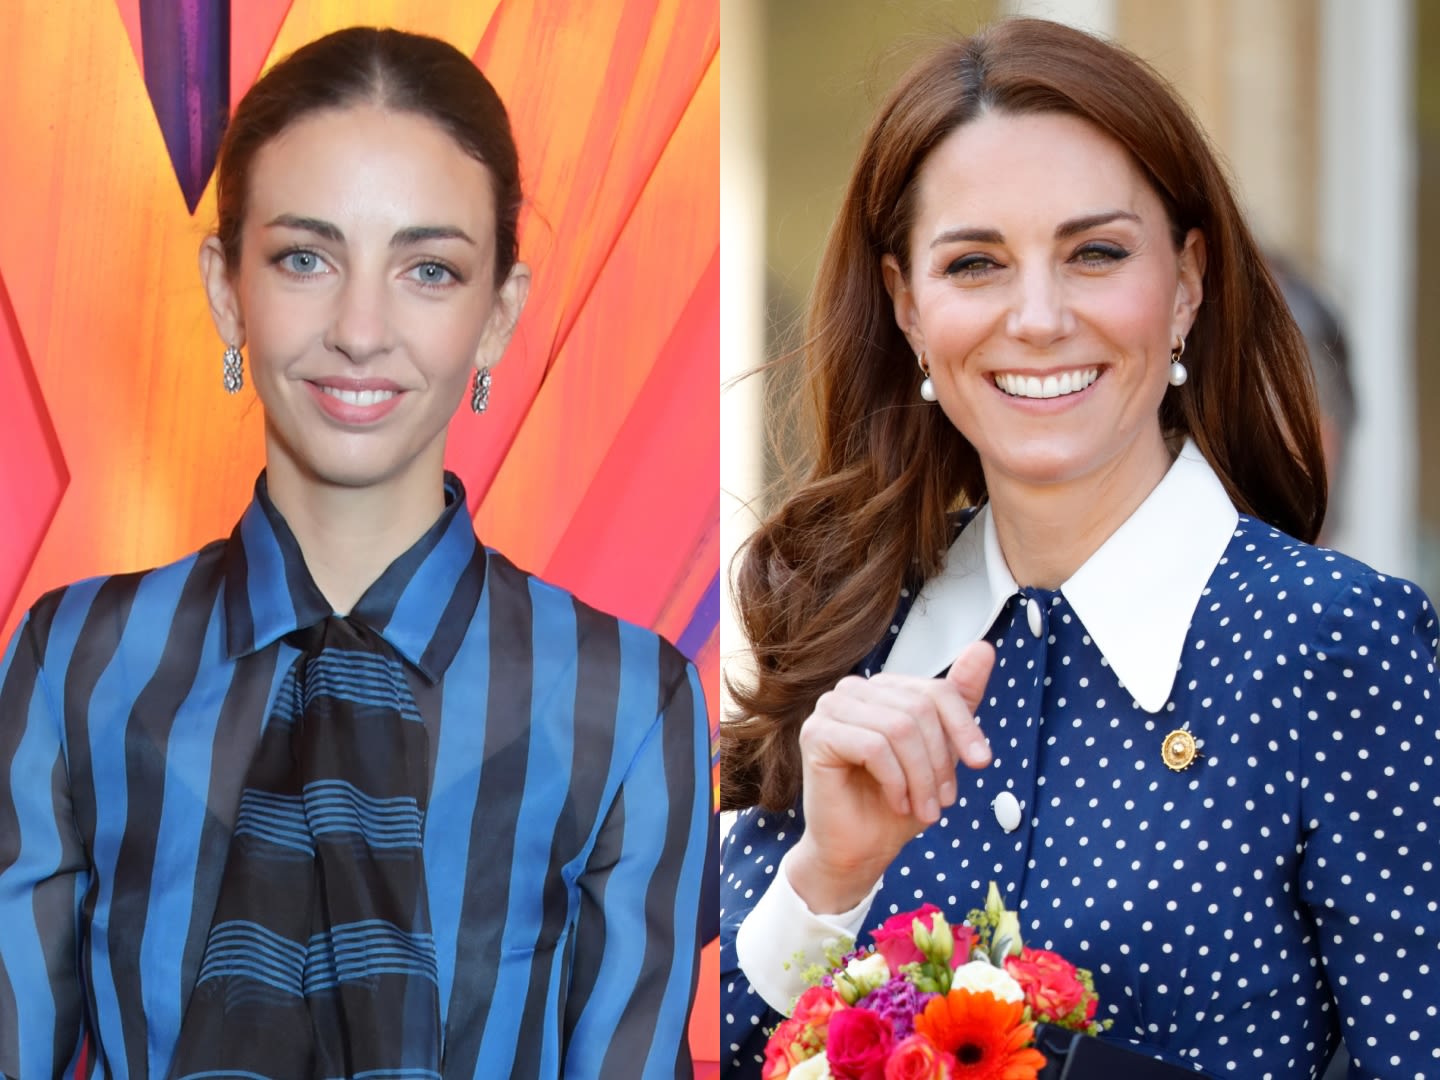 Eagle-Eyed Fans Noticed That Rose Hanbury Recently Donned One of Kate Middleton’s Accessories